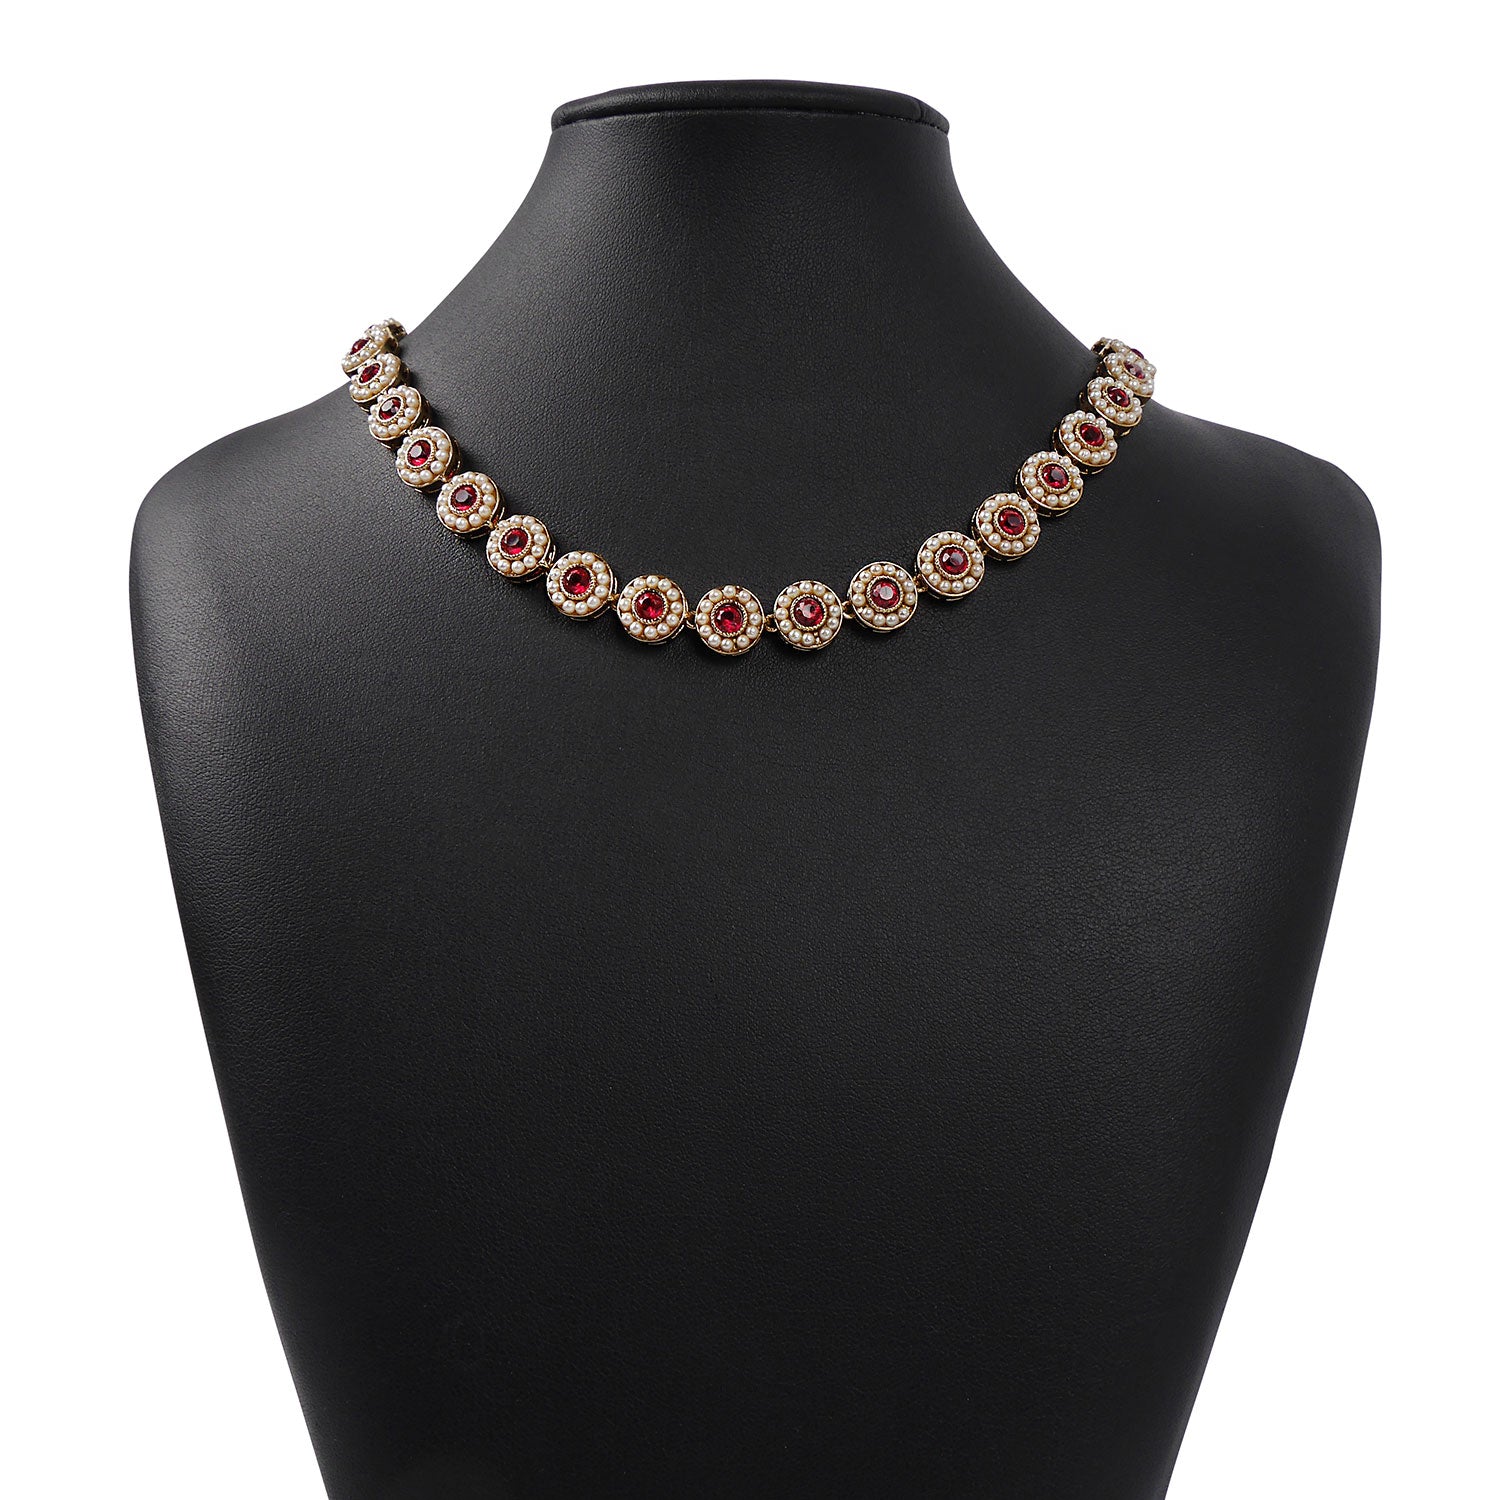 Leela Necklace in Hot Pink